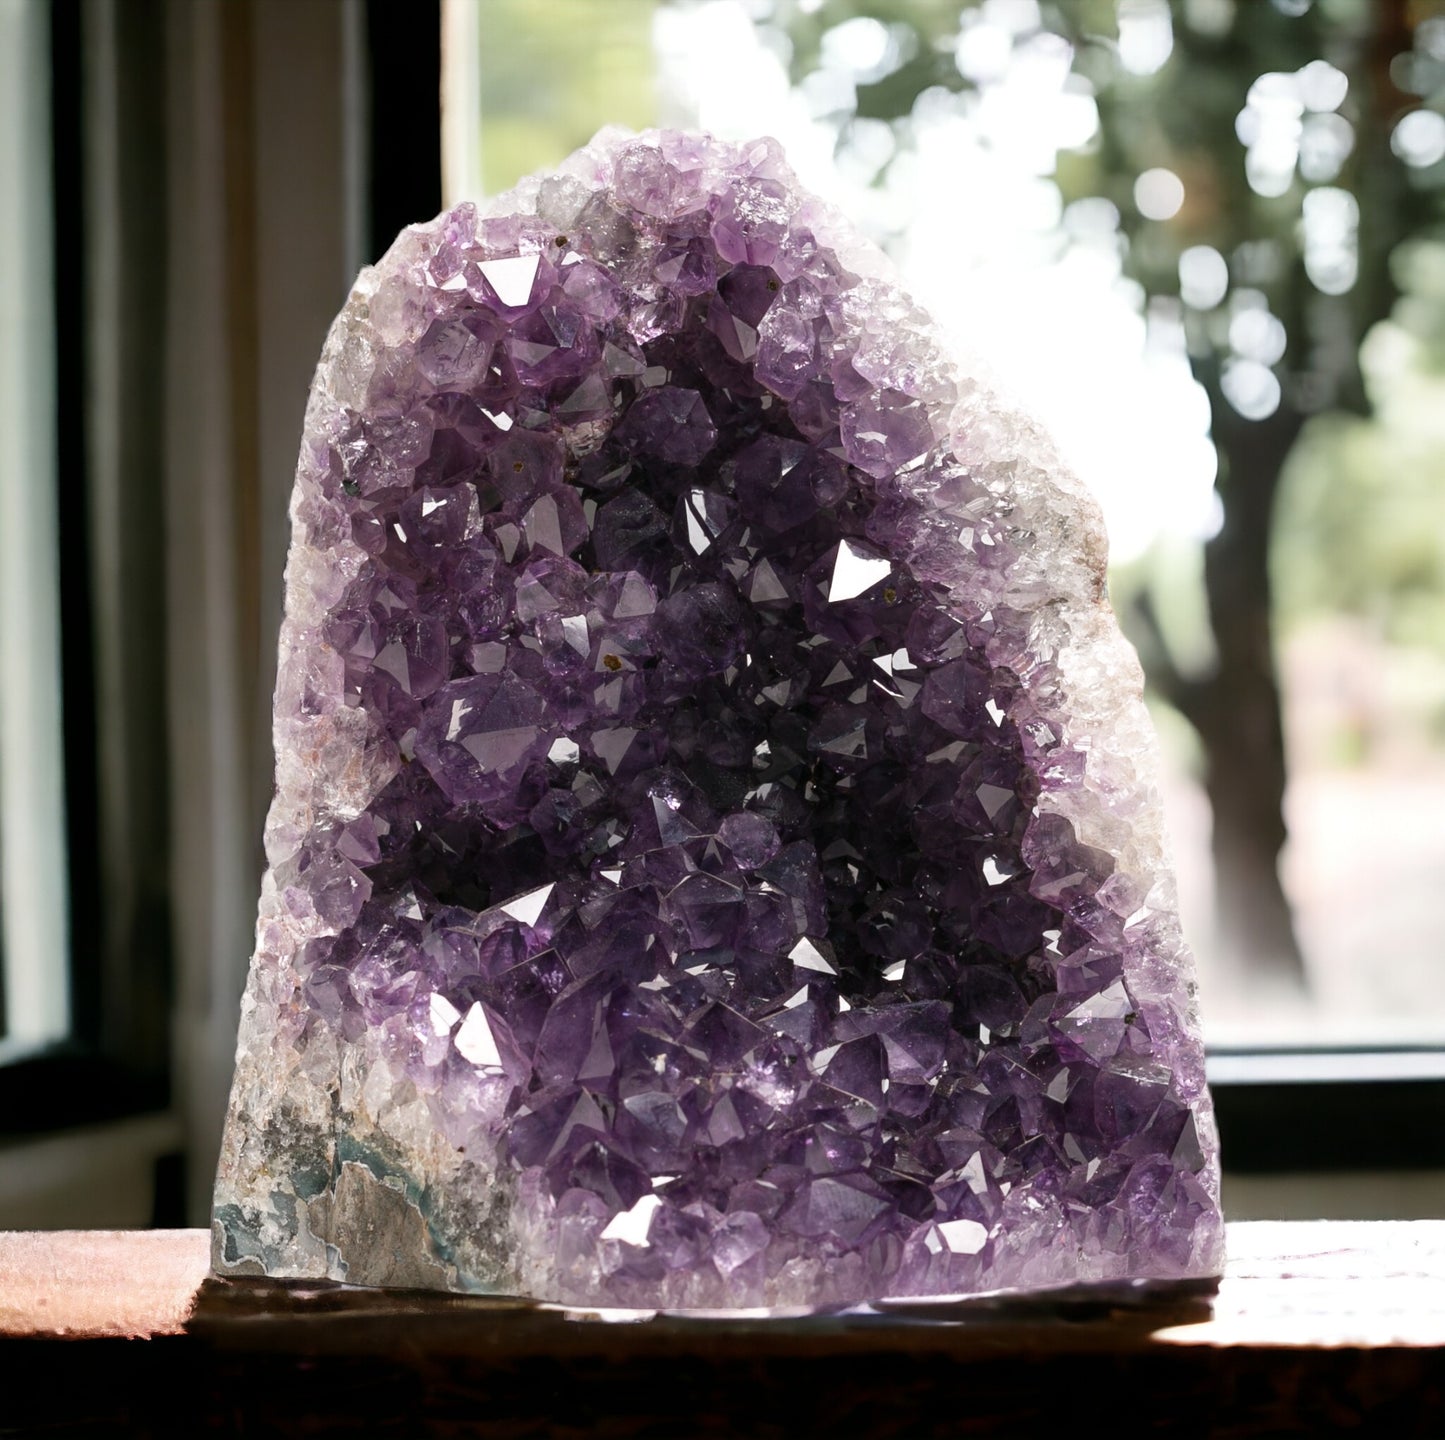 Deep Purple Natural Amethyst Crystal Clusters (0.5 lb to 1 lb) from Uruguay Raw Geode Quartz